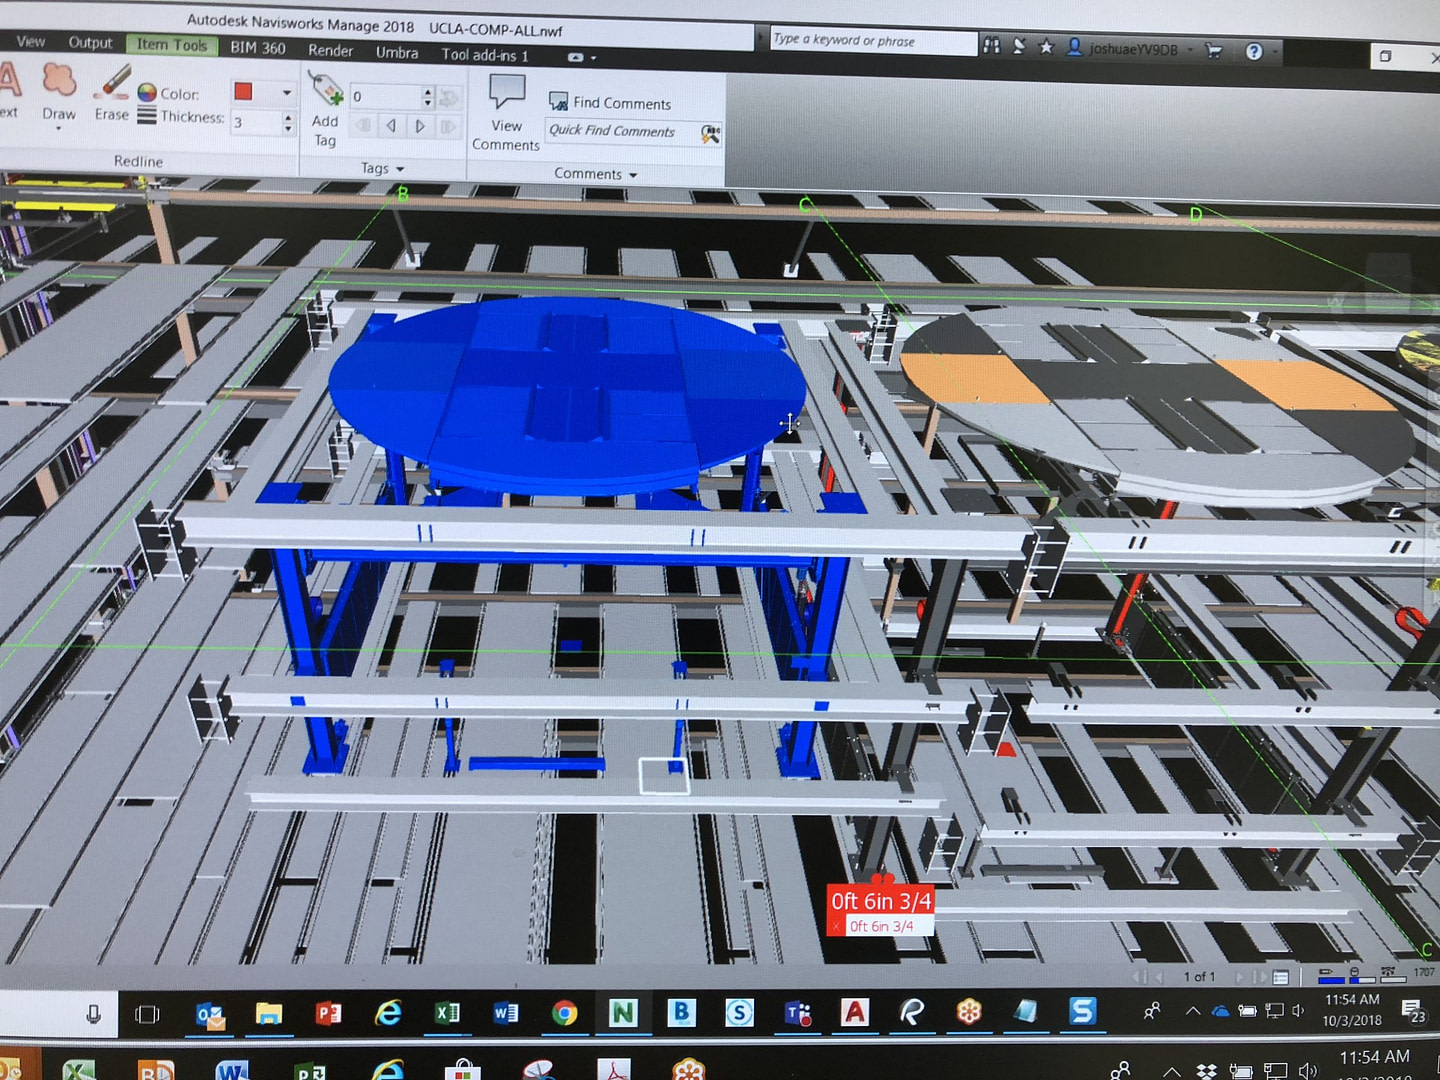 BIM 3D design for the new automated parking system at UCLA medical center